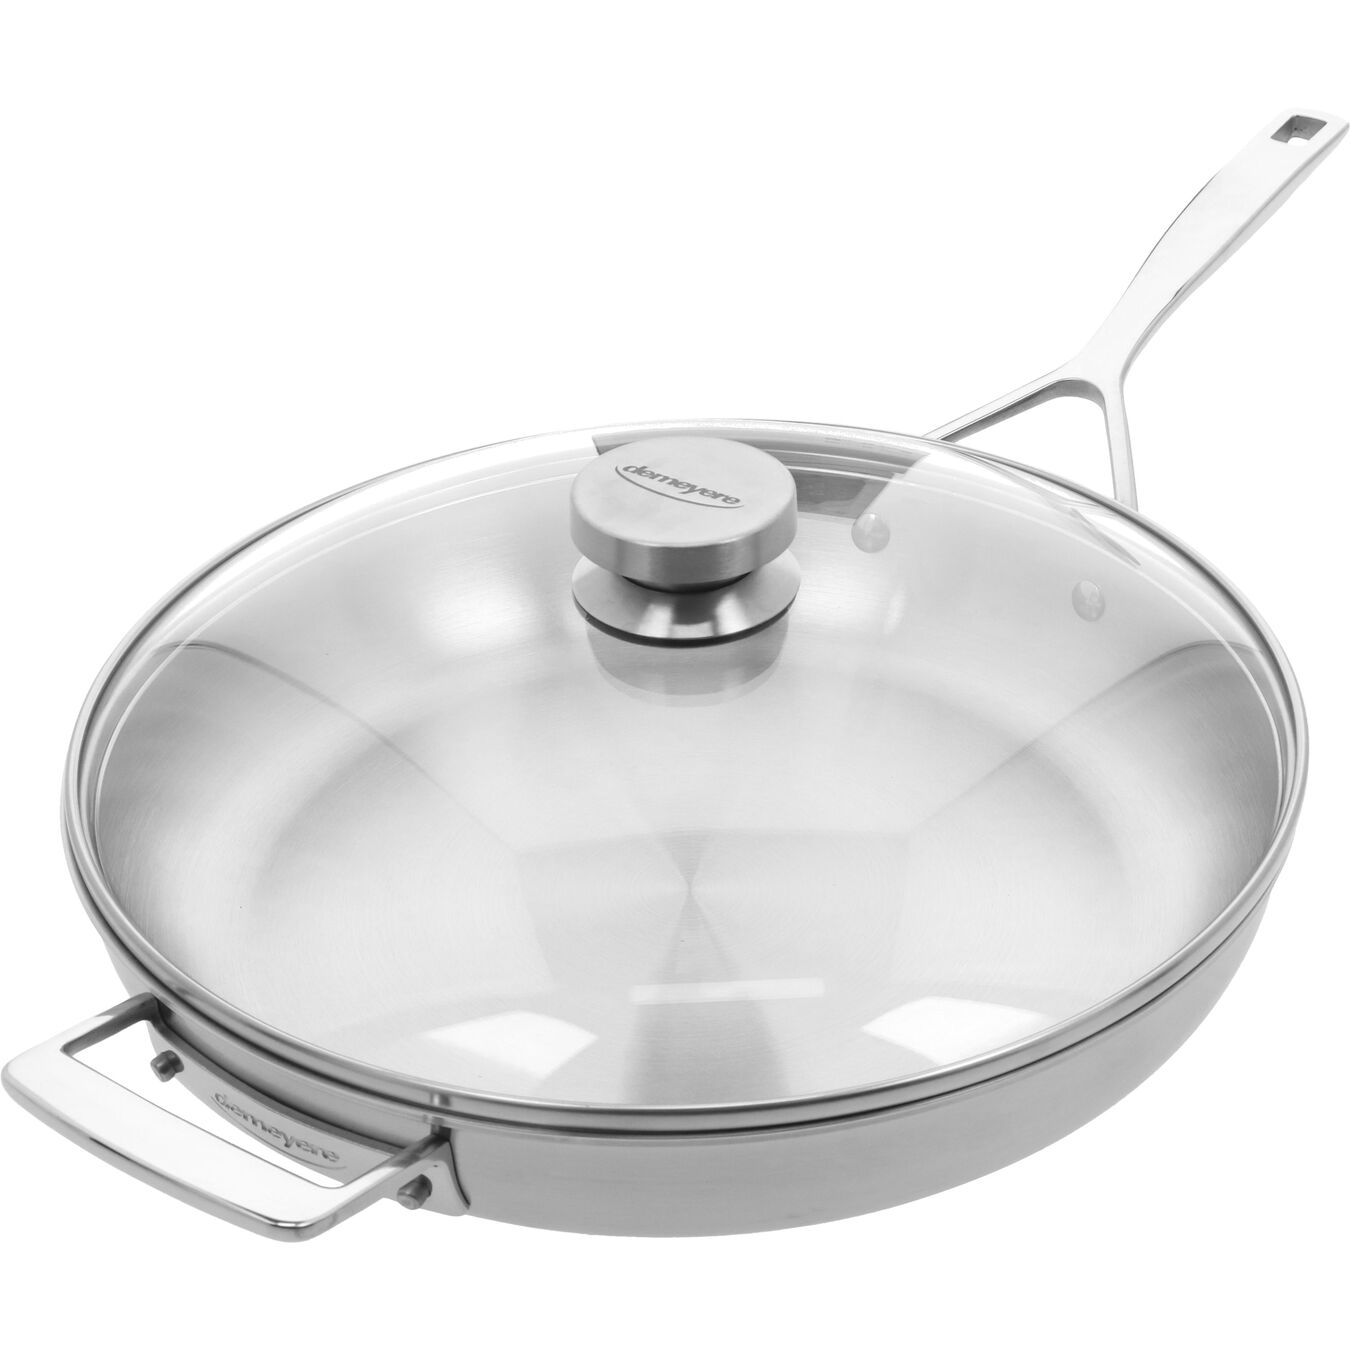 32 cm / 12.5 inch 18/10 Stainless Steel frying pan with lid,,large 5